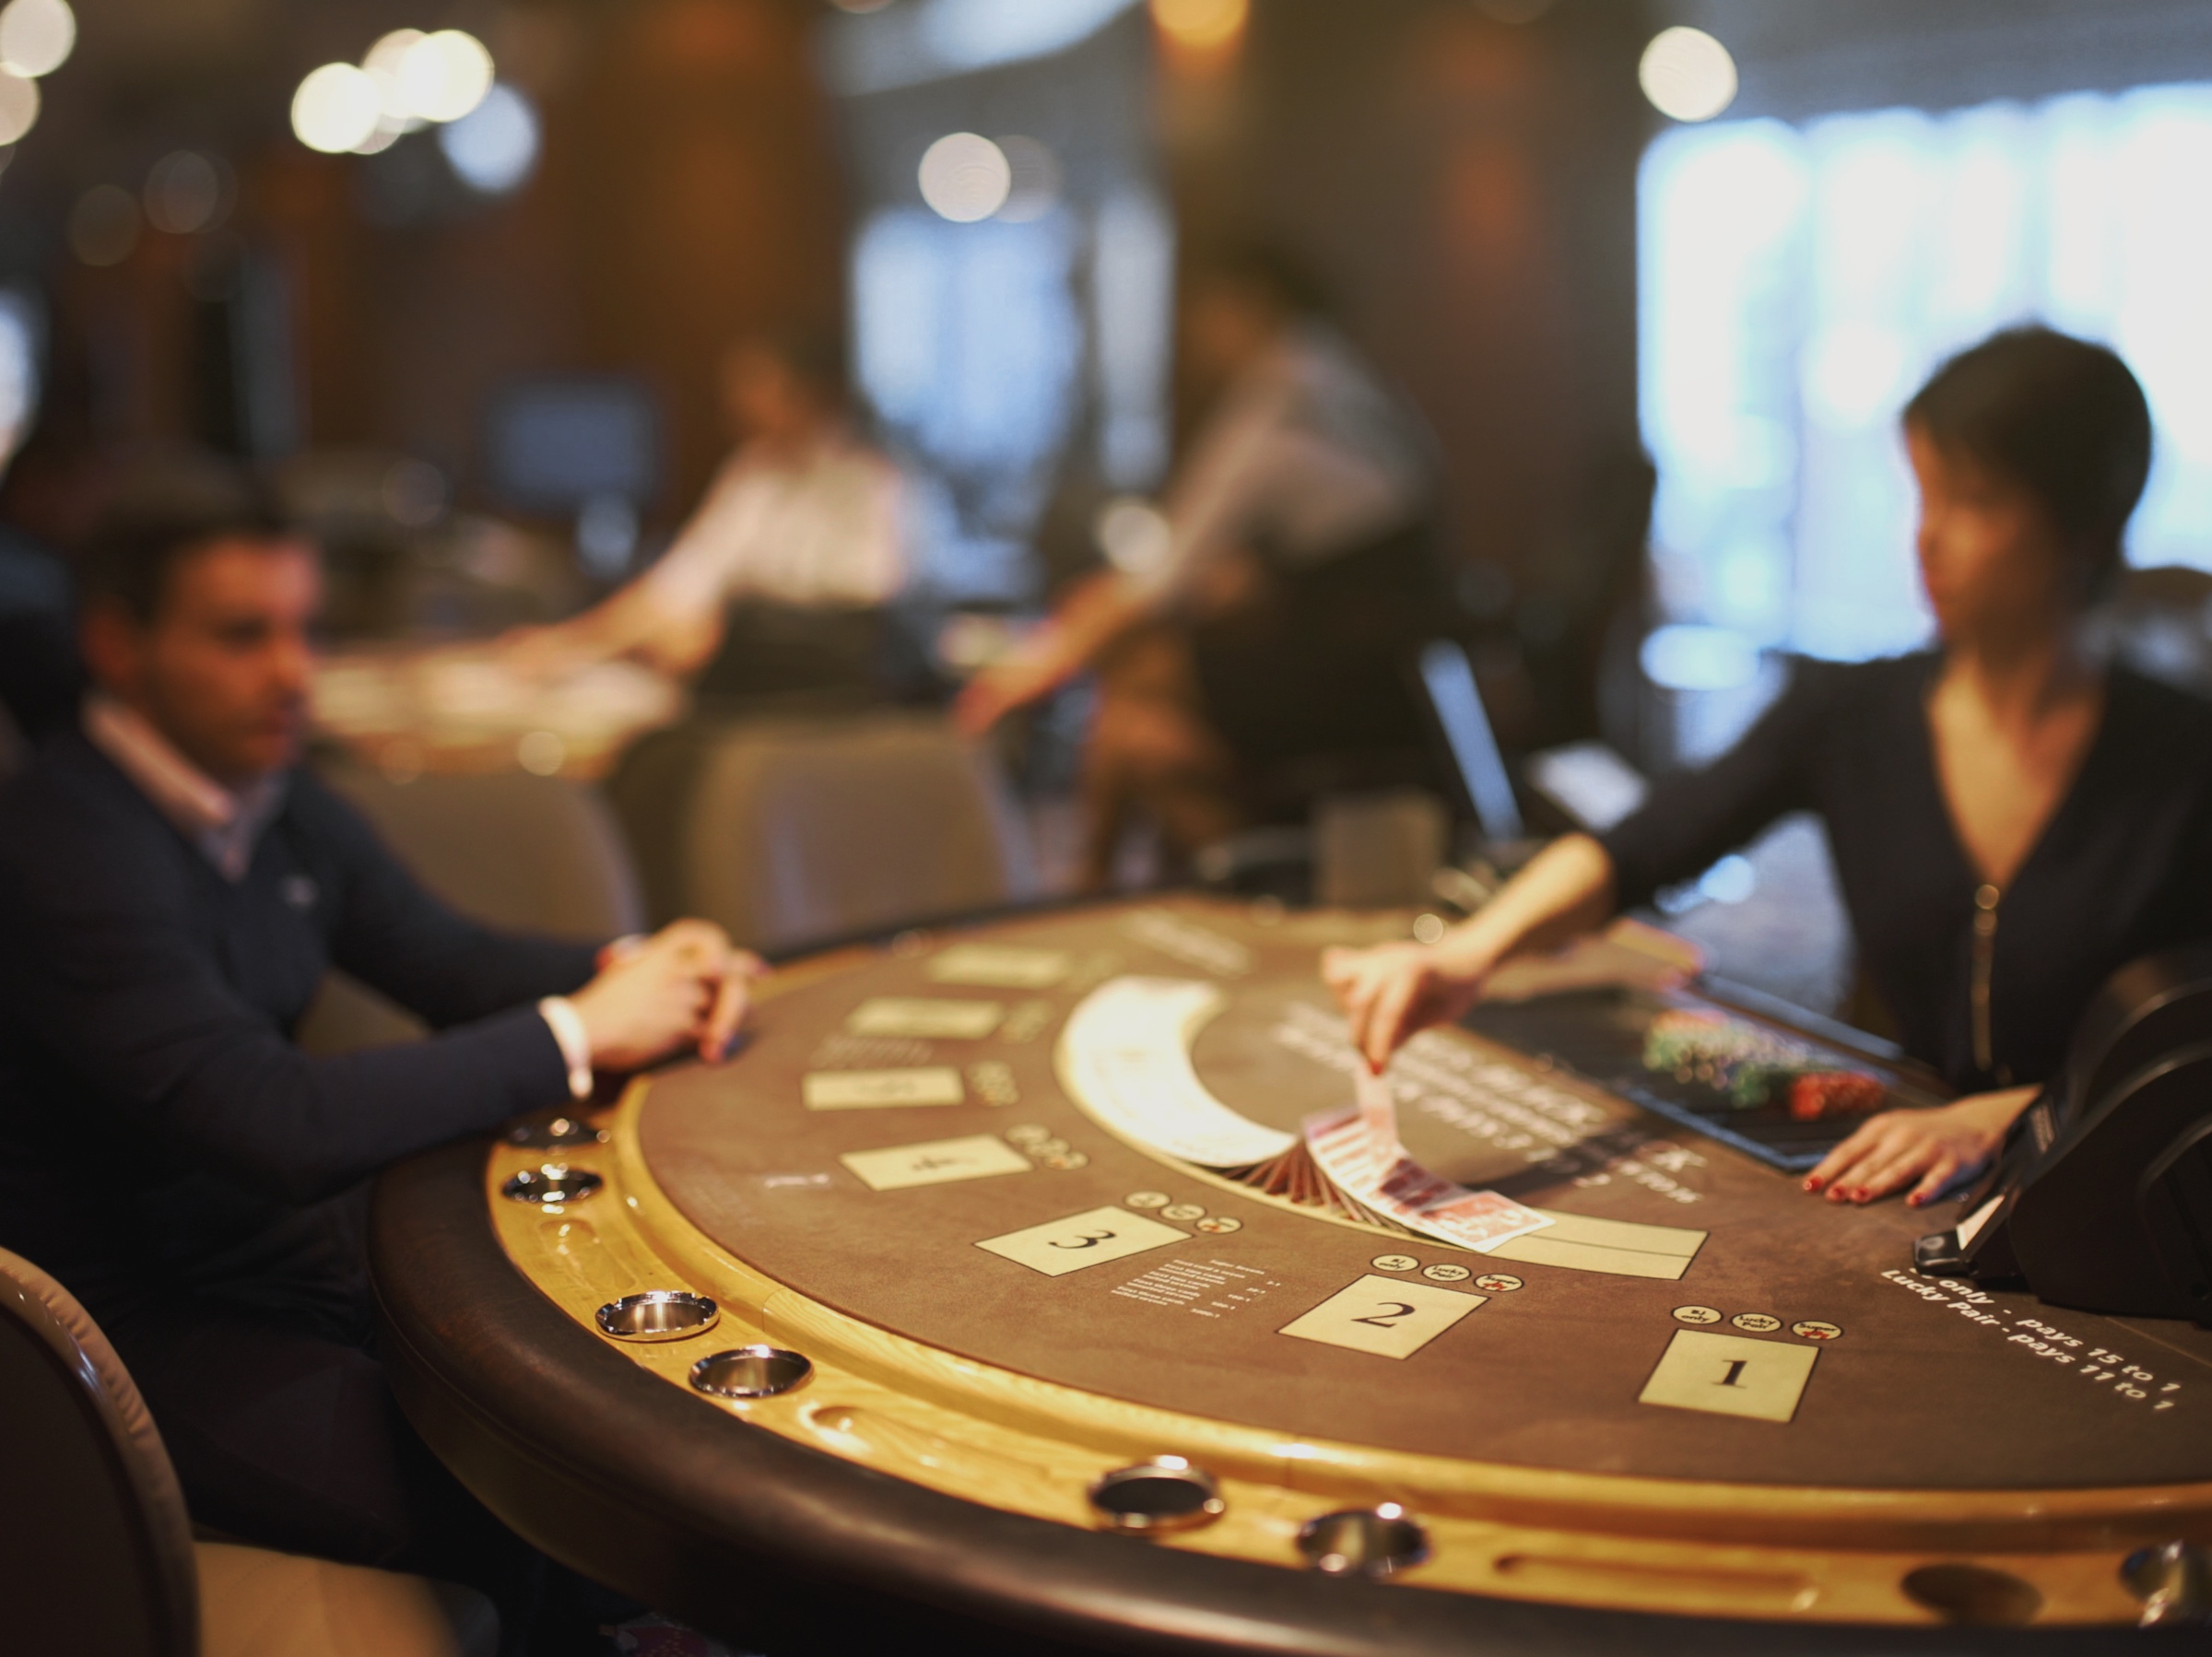 A Black Jack table at the casino with dealer and player